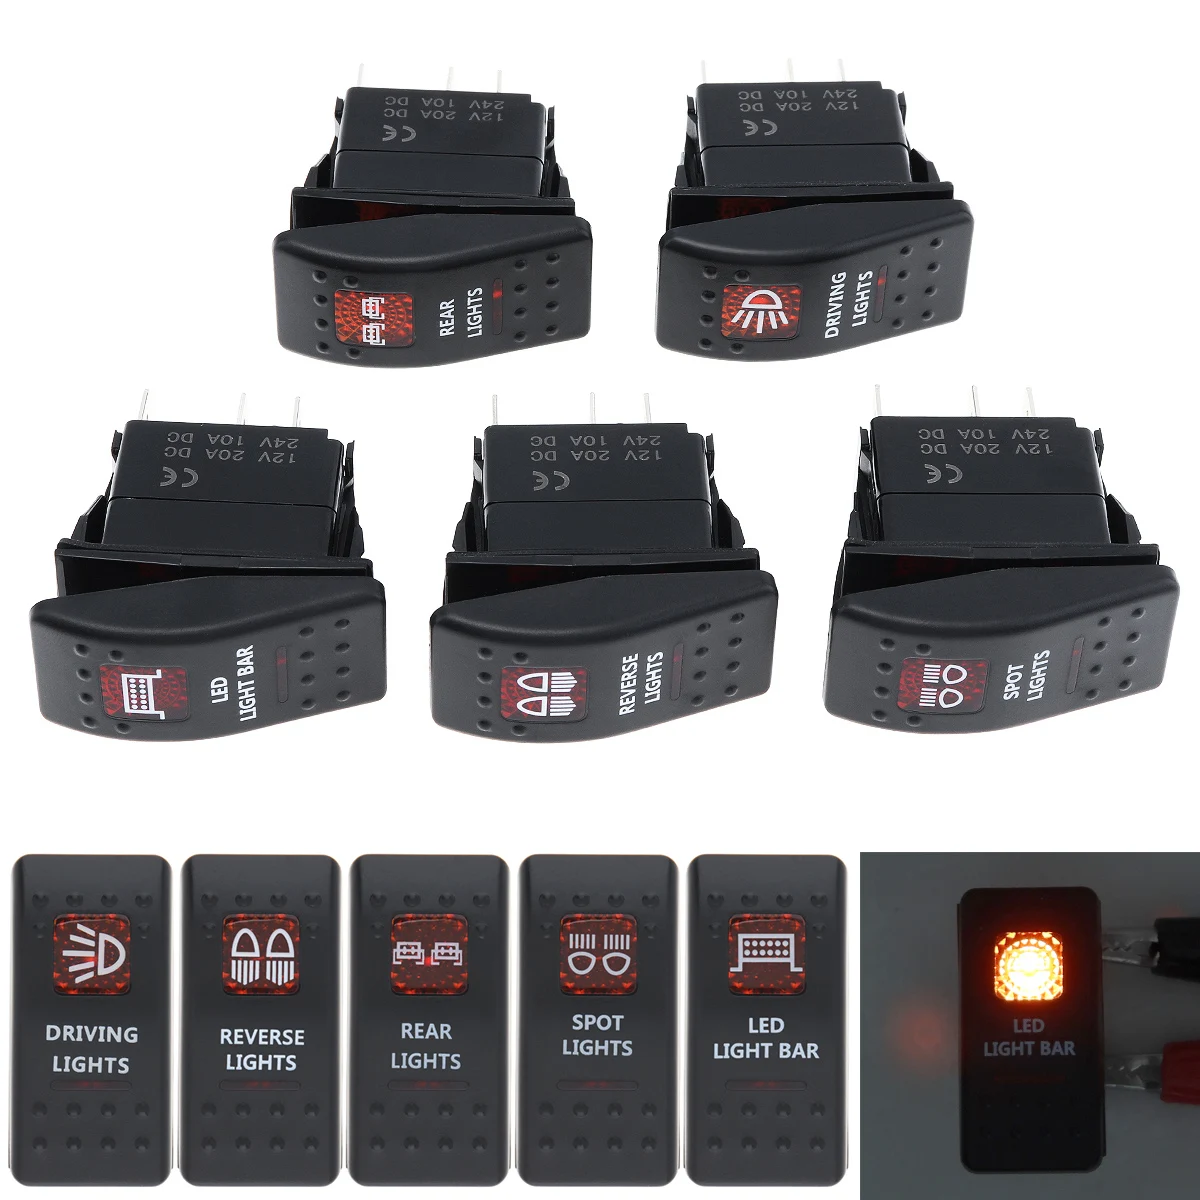 

Waterproof 20A 12-24V 5 Pin Marine Switch SPST ON-OFF Car Red Led Lights Switches Boat Truck Light with Dual Illuminated LED